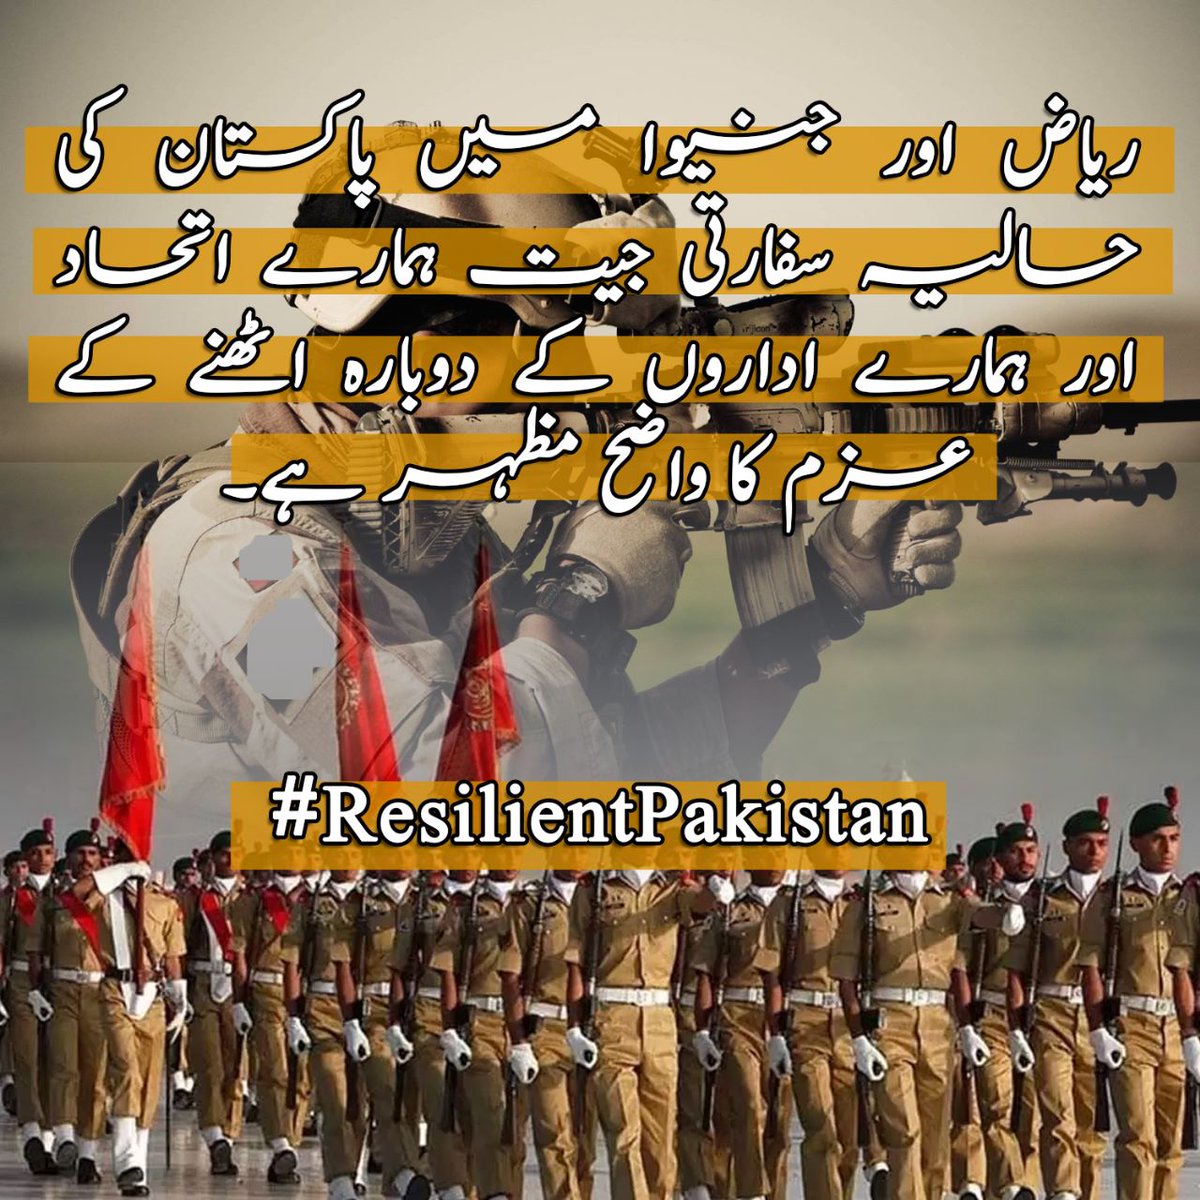 #ResilientPakistan The country has a large and young population, which could be a source of demographic dividend and economic growth in the future.